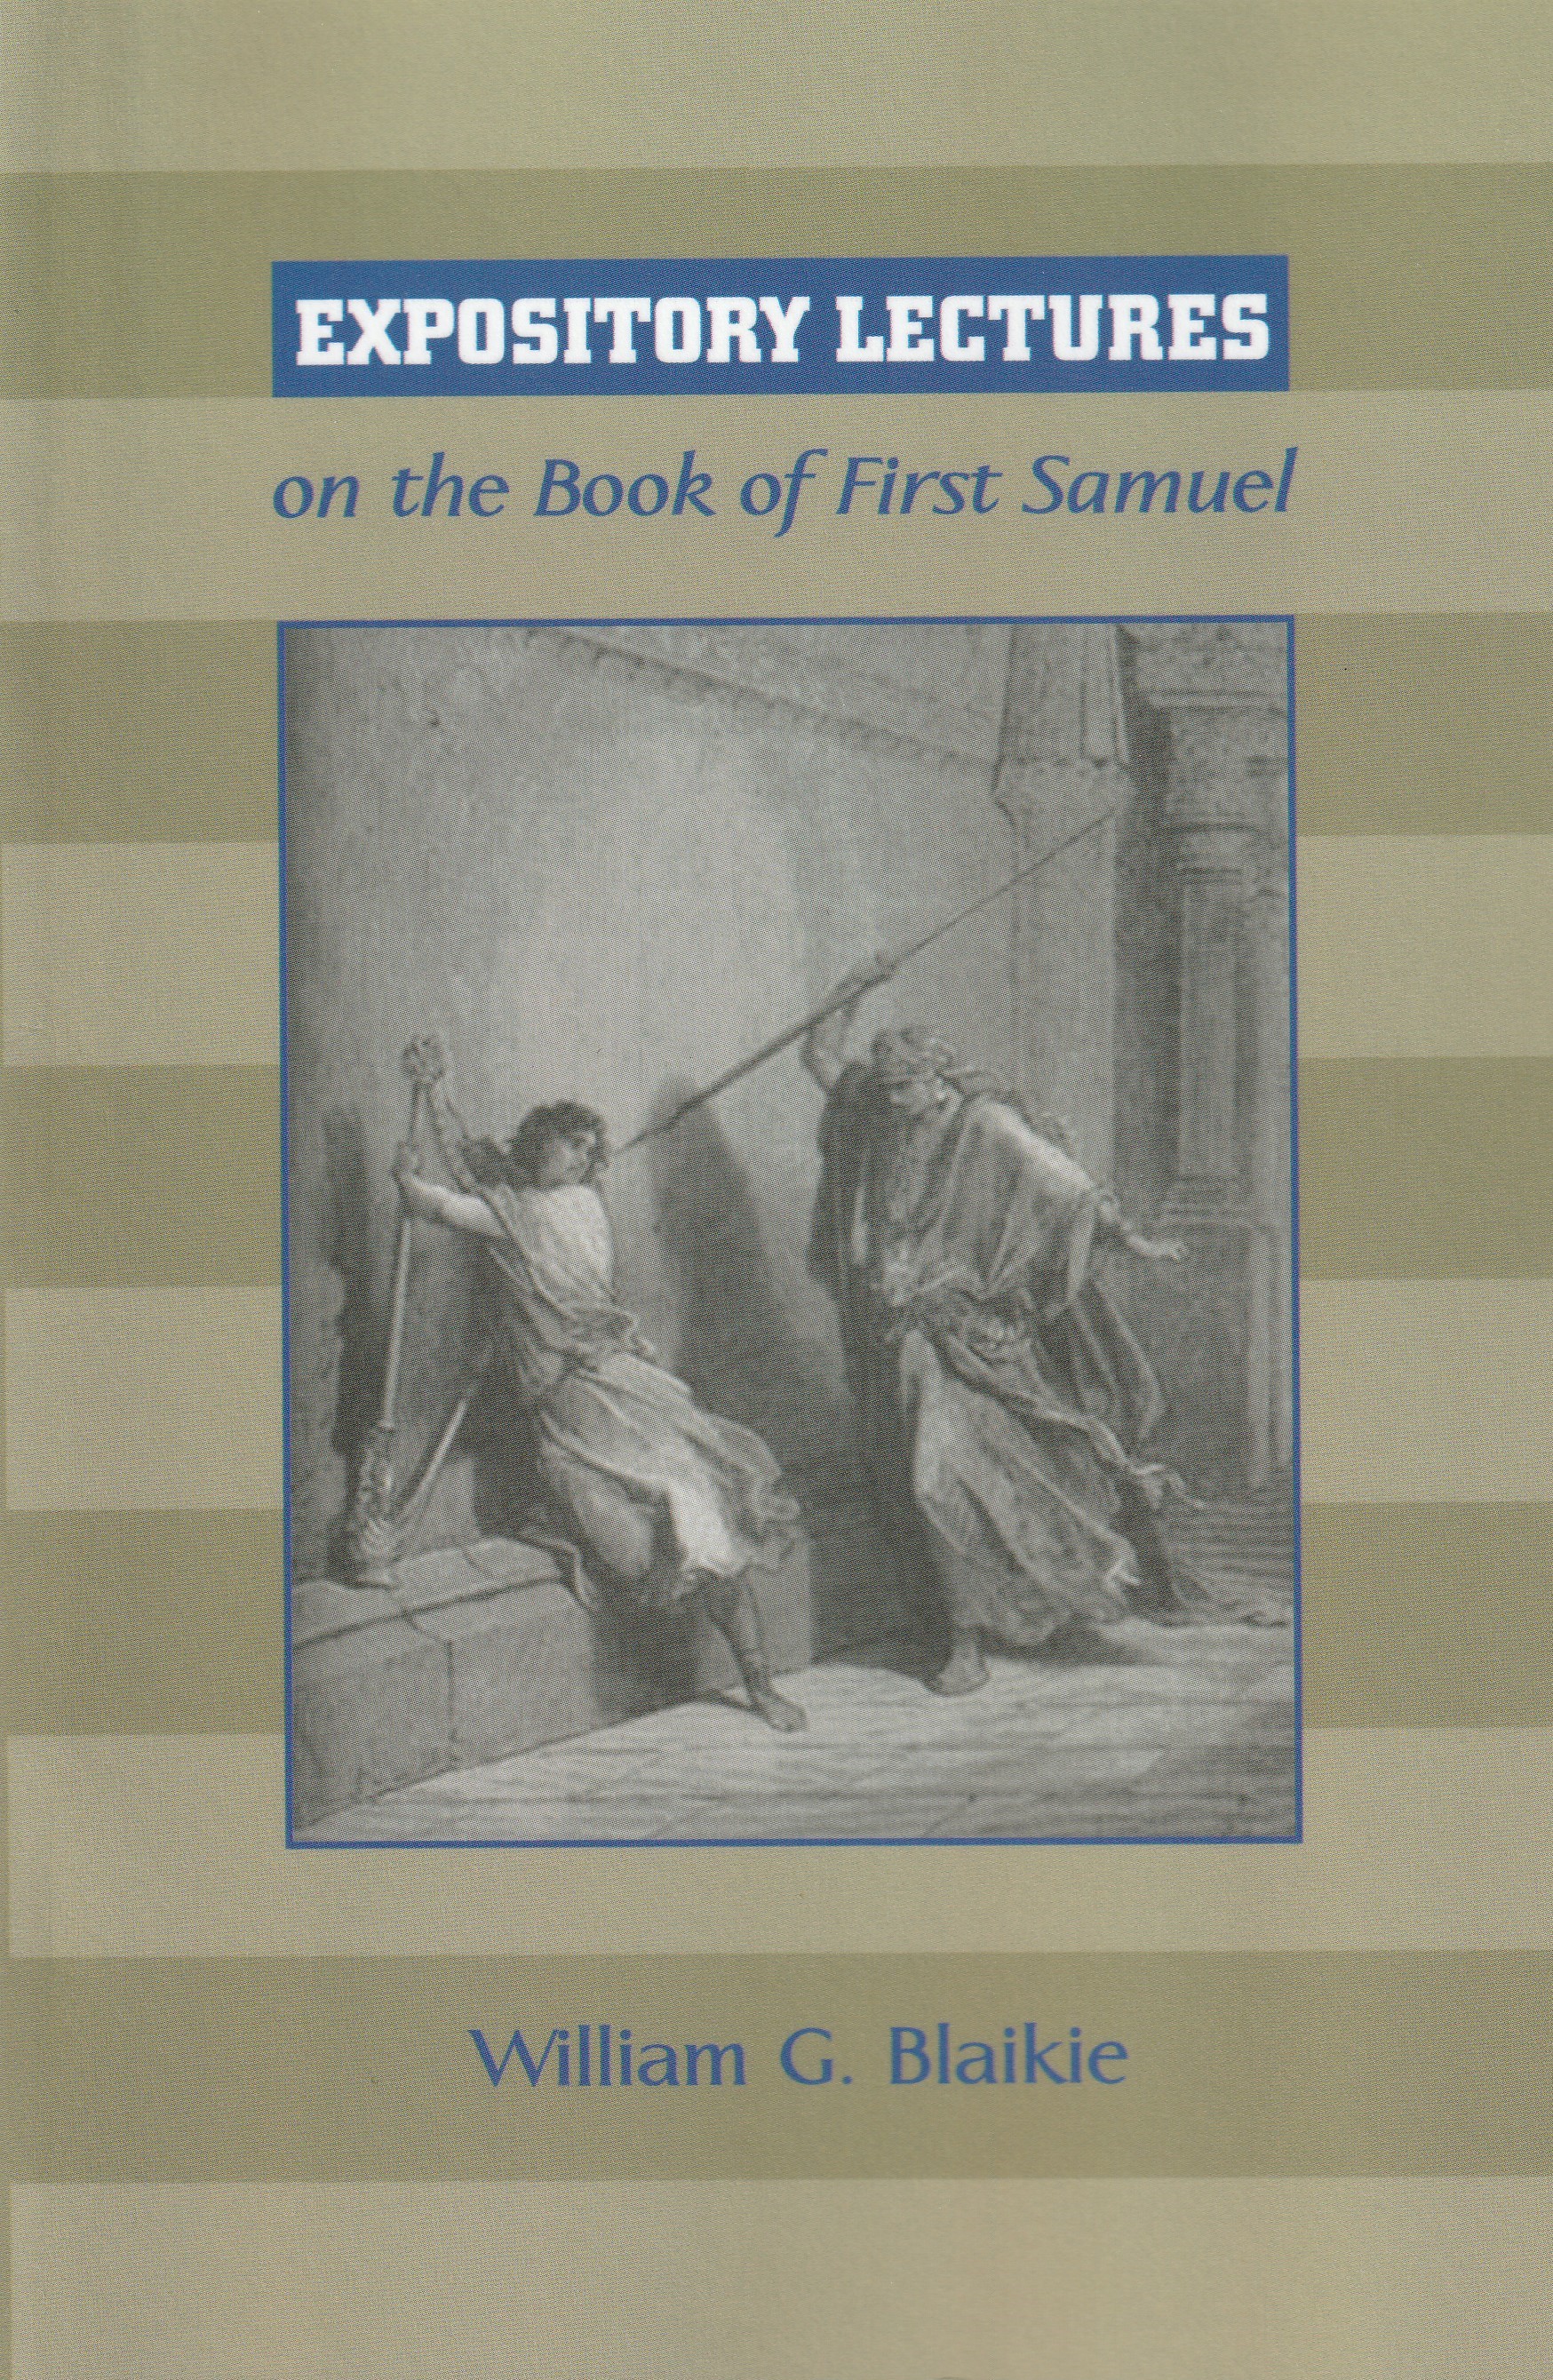 Expository Lectures on the Book of First Samuel